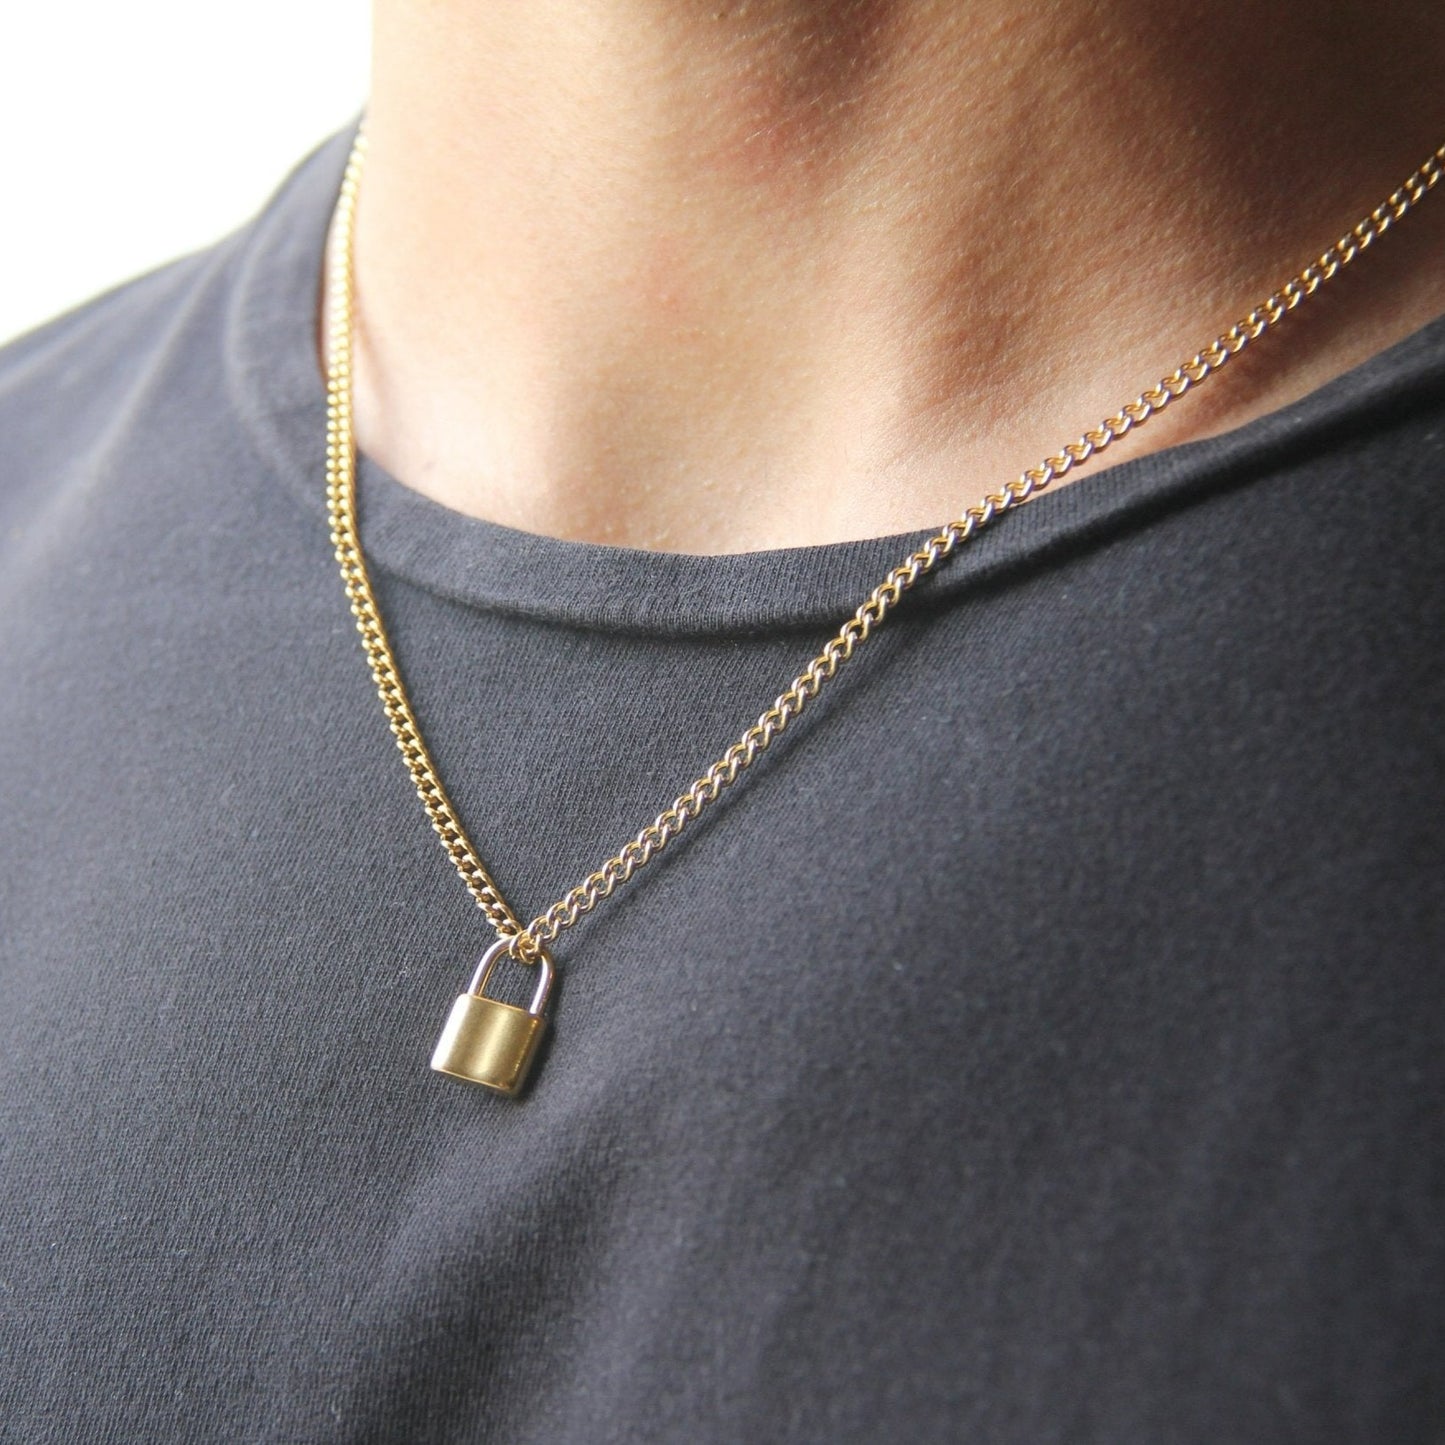 Gold Lock Pendant Necklace Curb Chain For Men or Women